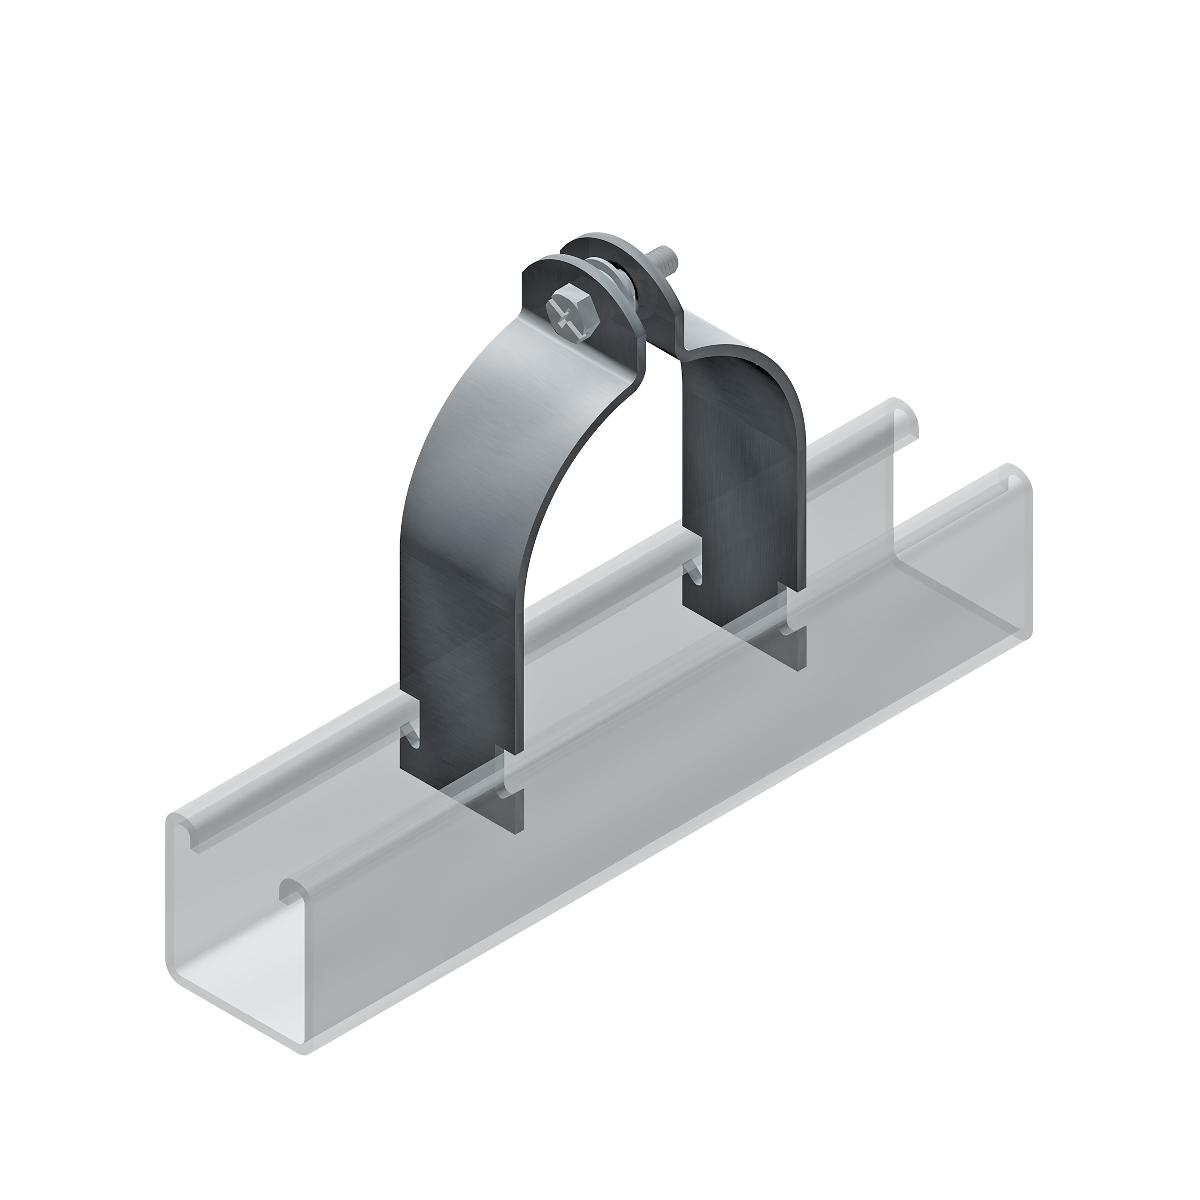 E5-54H TWO PIECE PIPE CLAMP HDG